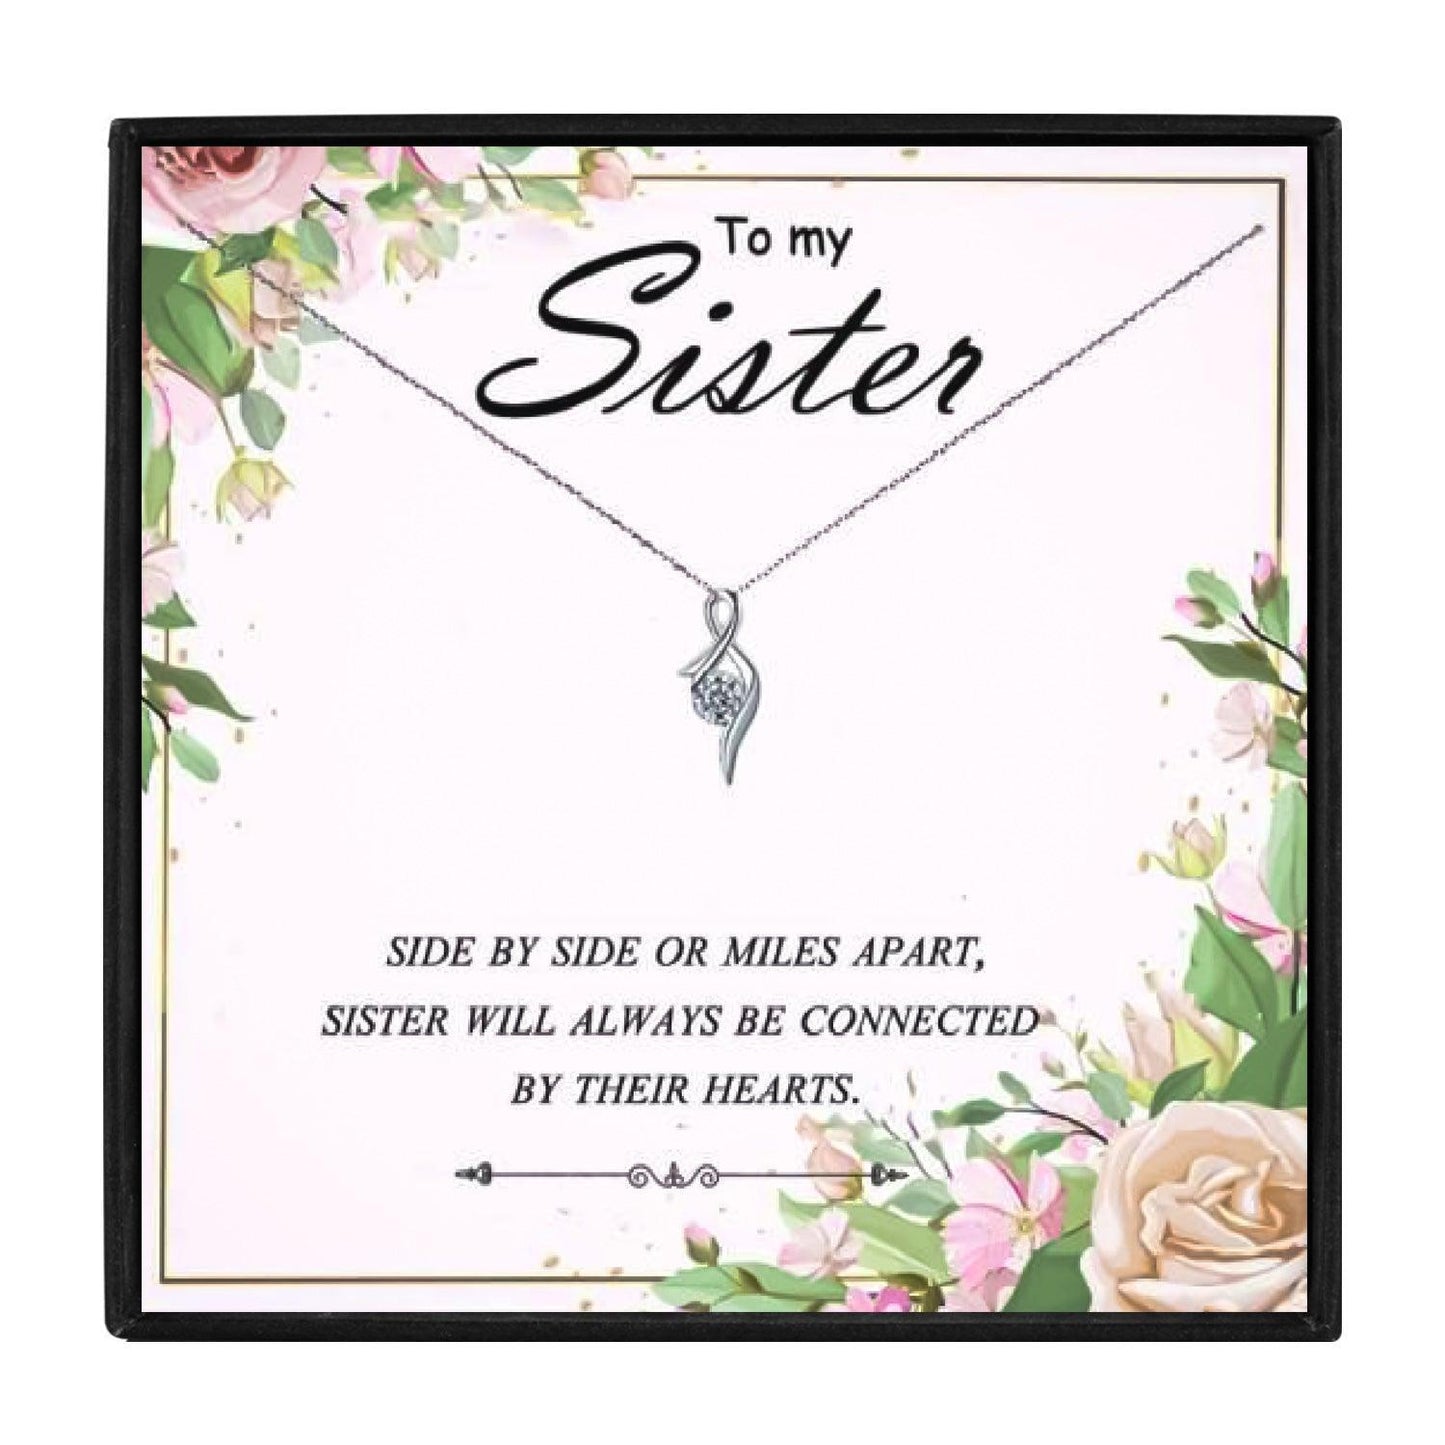 To My Beautiful Sister Gift Necklaces Set for Christmas 2023 | To My Beautiful Sister Gift Necklaces Set - undefined | Beautiful Sister Gift Necklaces Set, Soul Sister Necklace, To My Soul Sister, To My Soul Sister Necklace | From Hunny Life | hunnylife.com